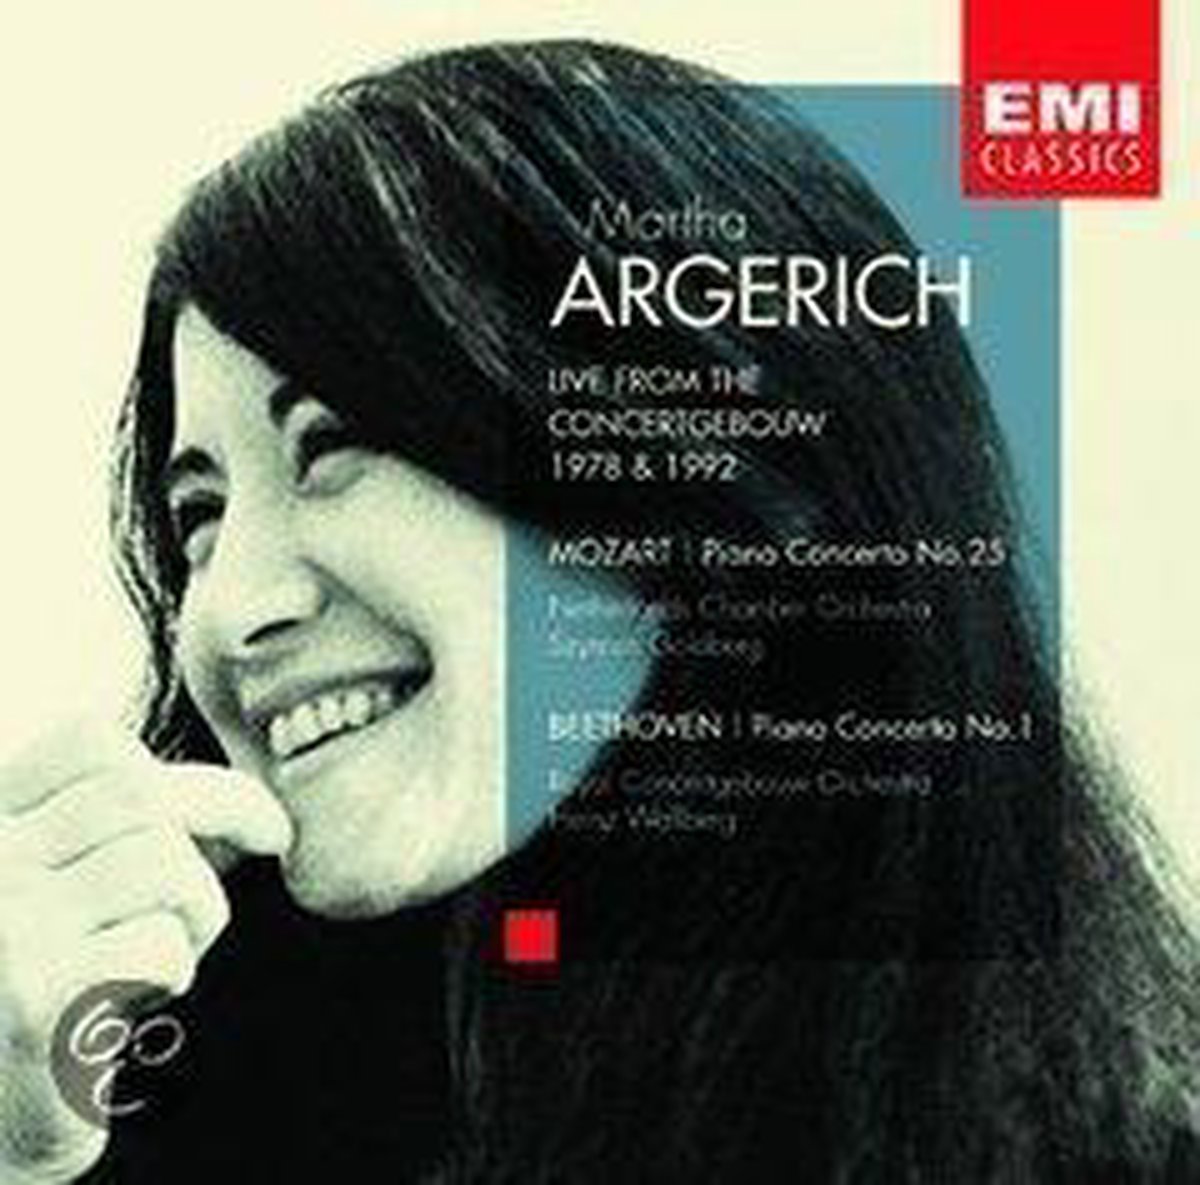 Martha Argerich Live From The Concertgebouw 1978 And 1992 Royal Concertgebouw 0771